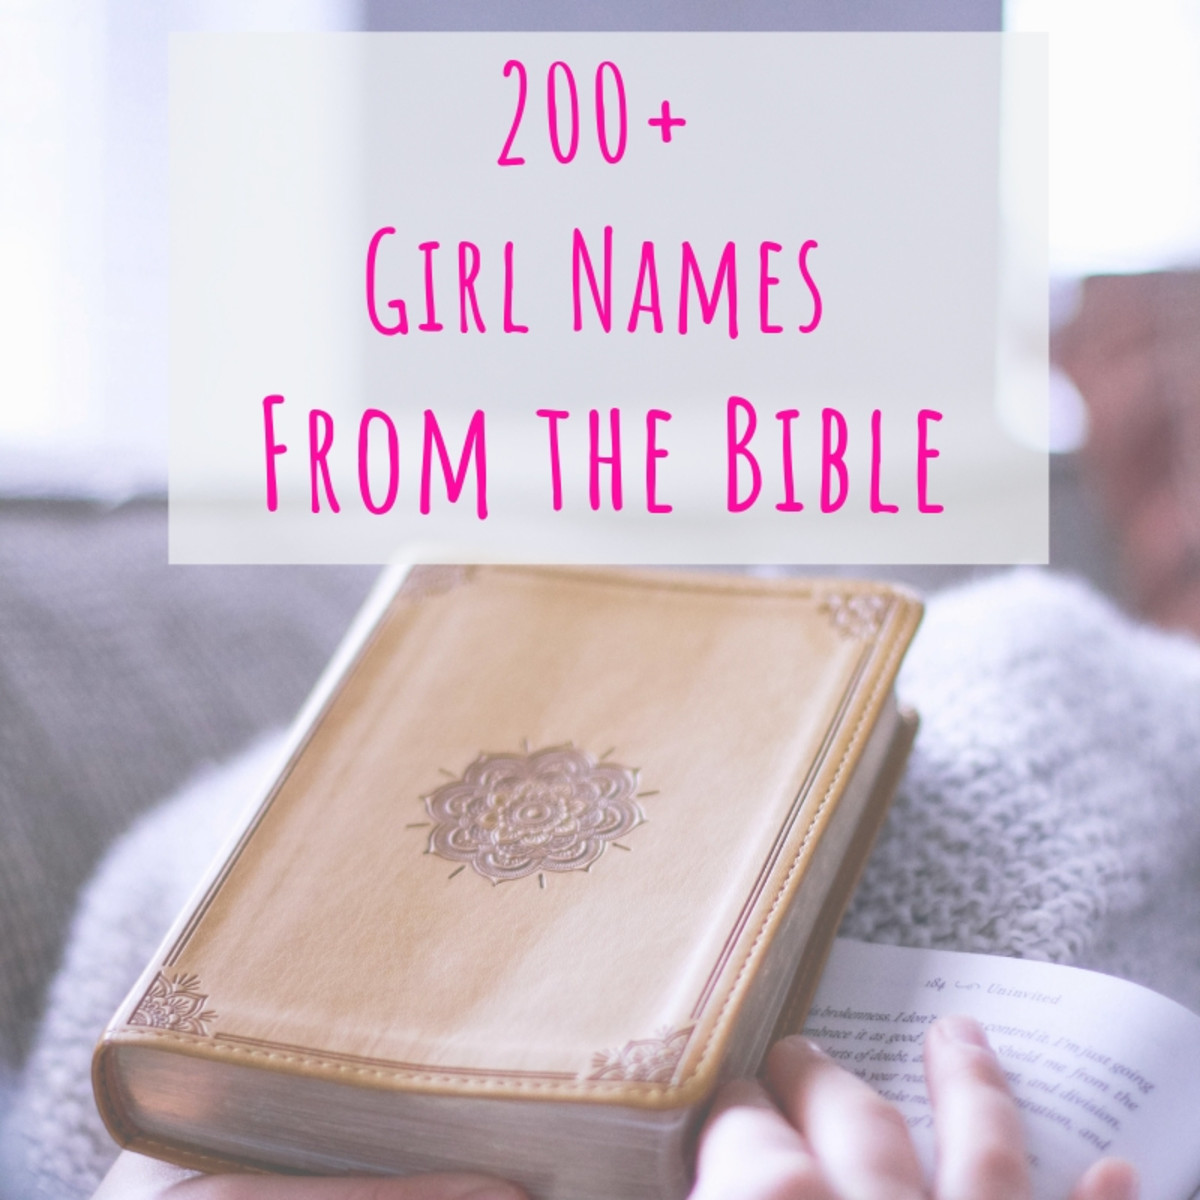 Try one of these female biblical names for your baby!